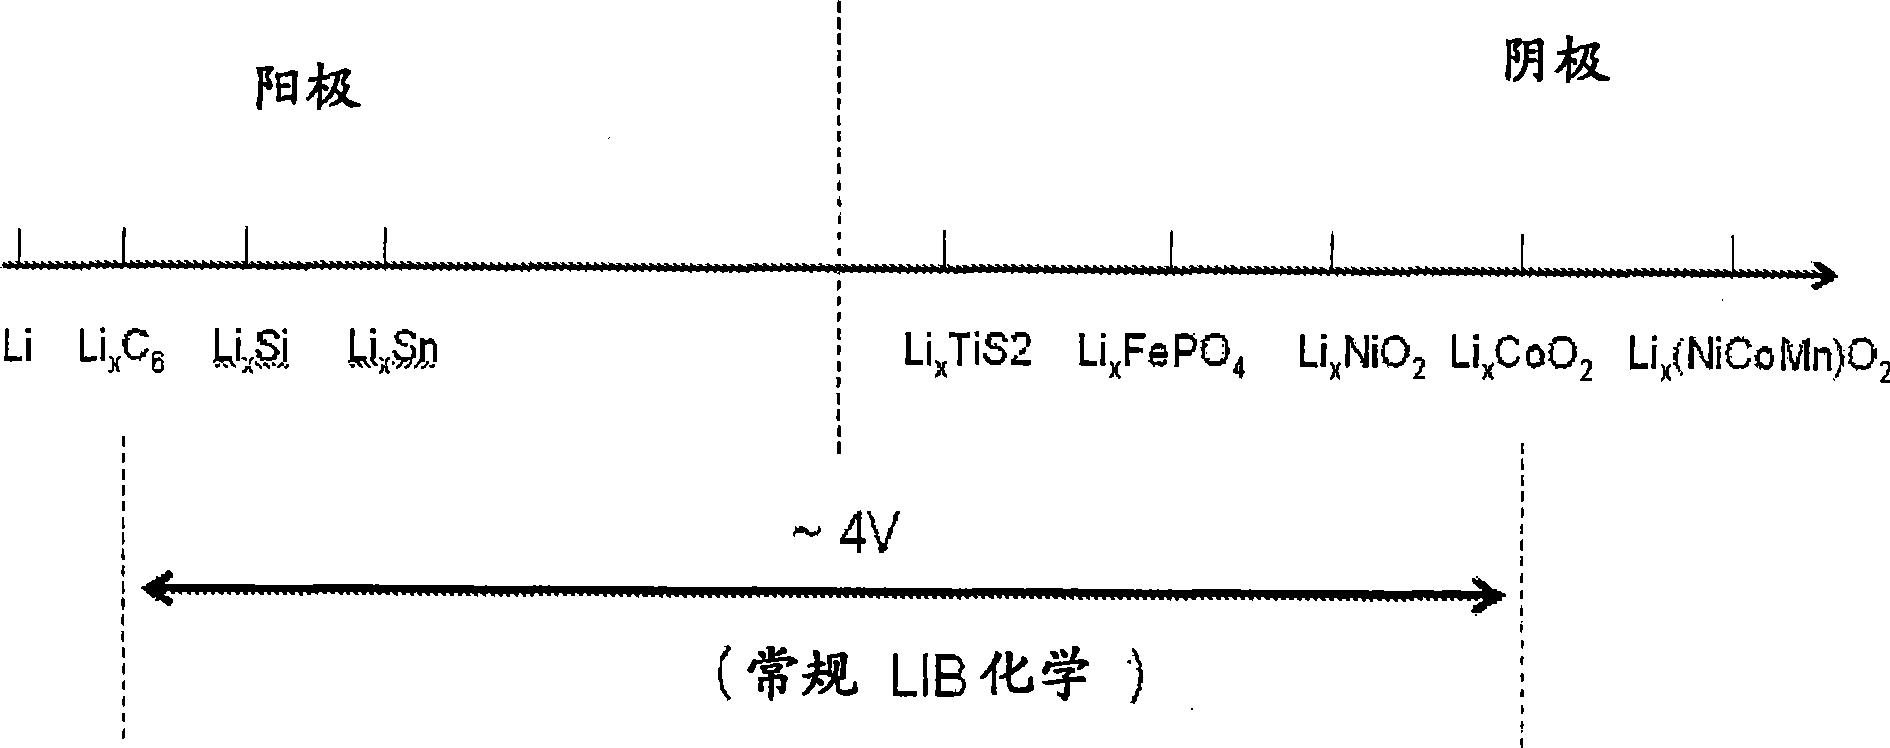 Fluoride ion electrochemical cell